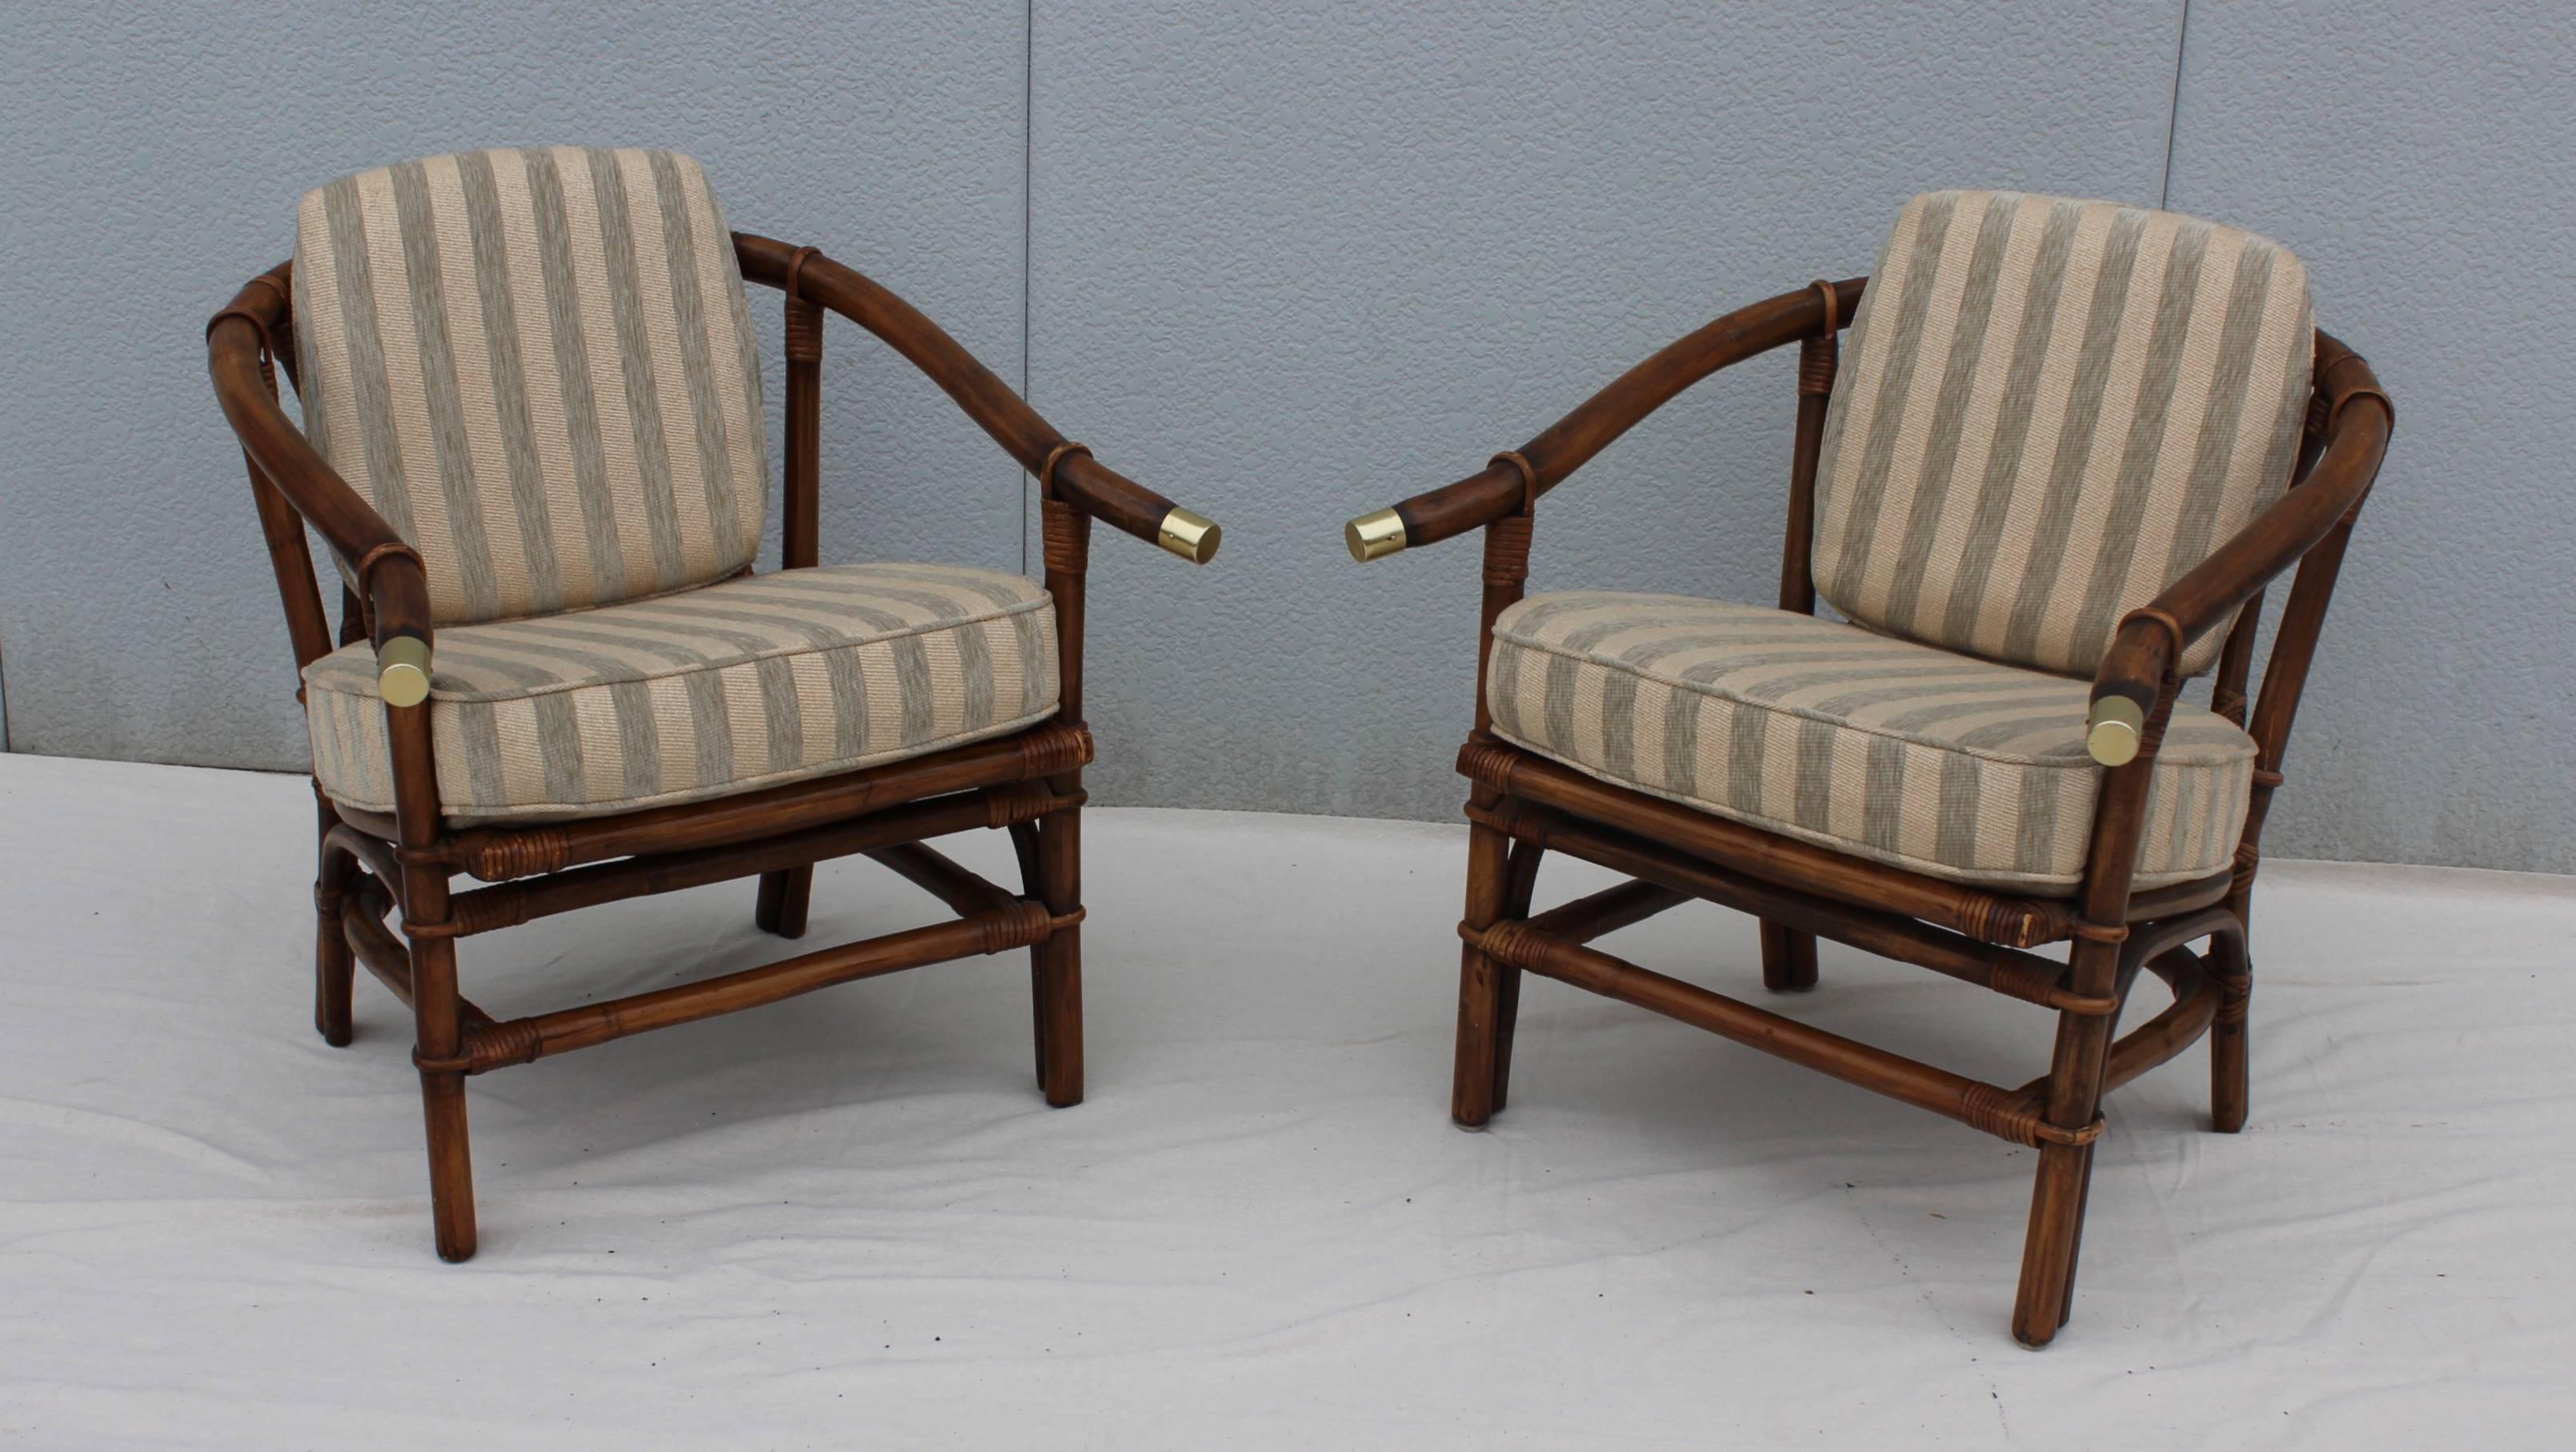 1950s Ficks Reed rattan and bamboo armchairs with chenille upholstery.

